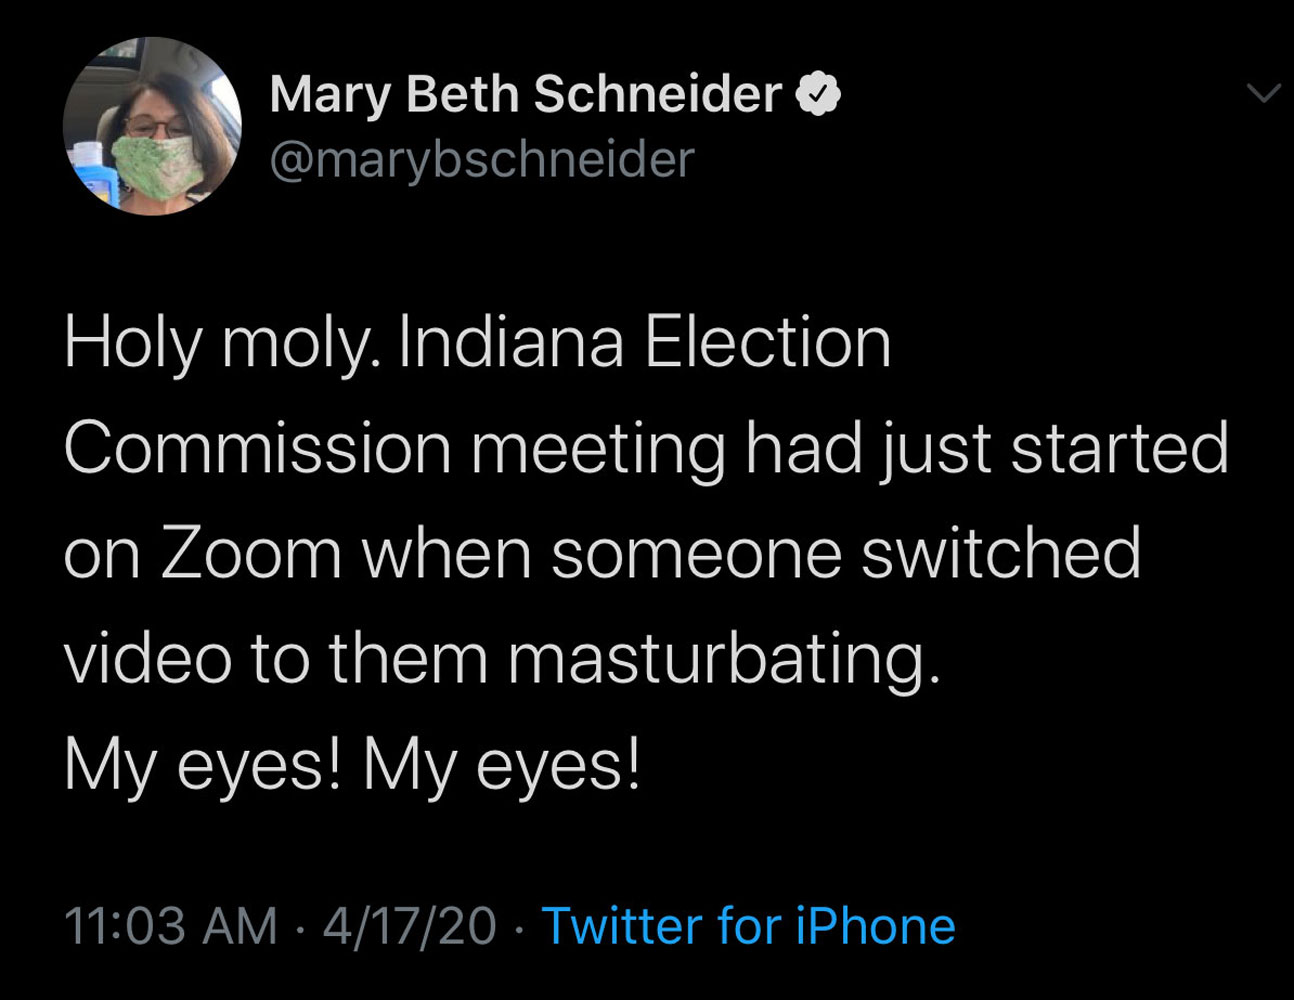 SCREENSHOT: Mary Beth Schneider editor of statehousefile.com tweeted that the Indiana Election Commission Zoom meeting was interrupted by somebody masturbating. Screenshot by The Signal reporter, Valery Rodriguez SOURCE: https://twitter.com/marybschneider/status/1251179490195185664